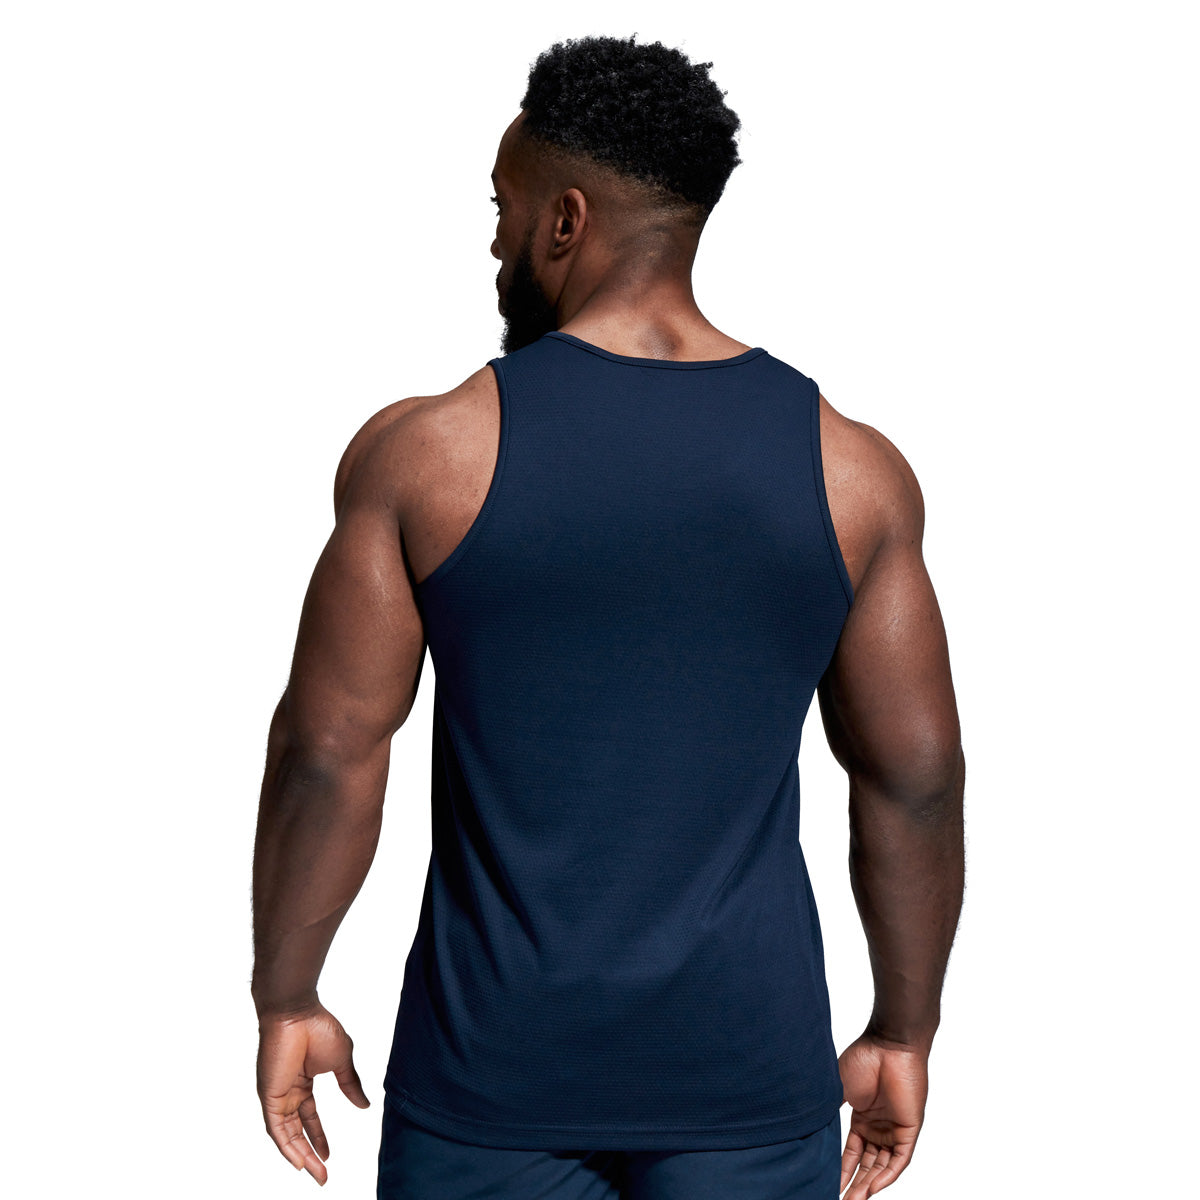 Photo of model from behind wearing Canterbury Club Dry Singlet in Navy